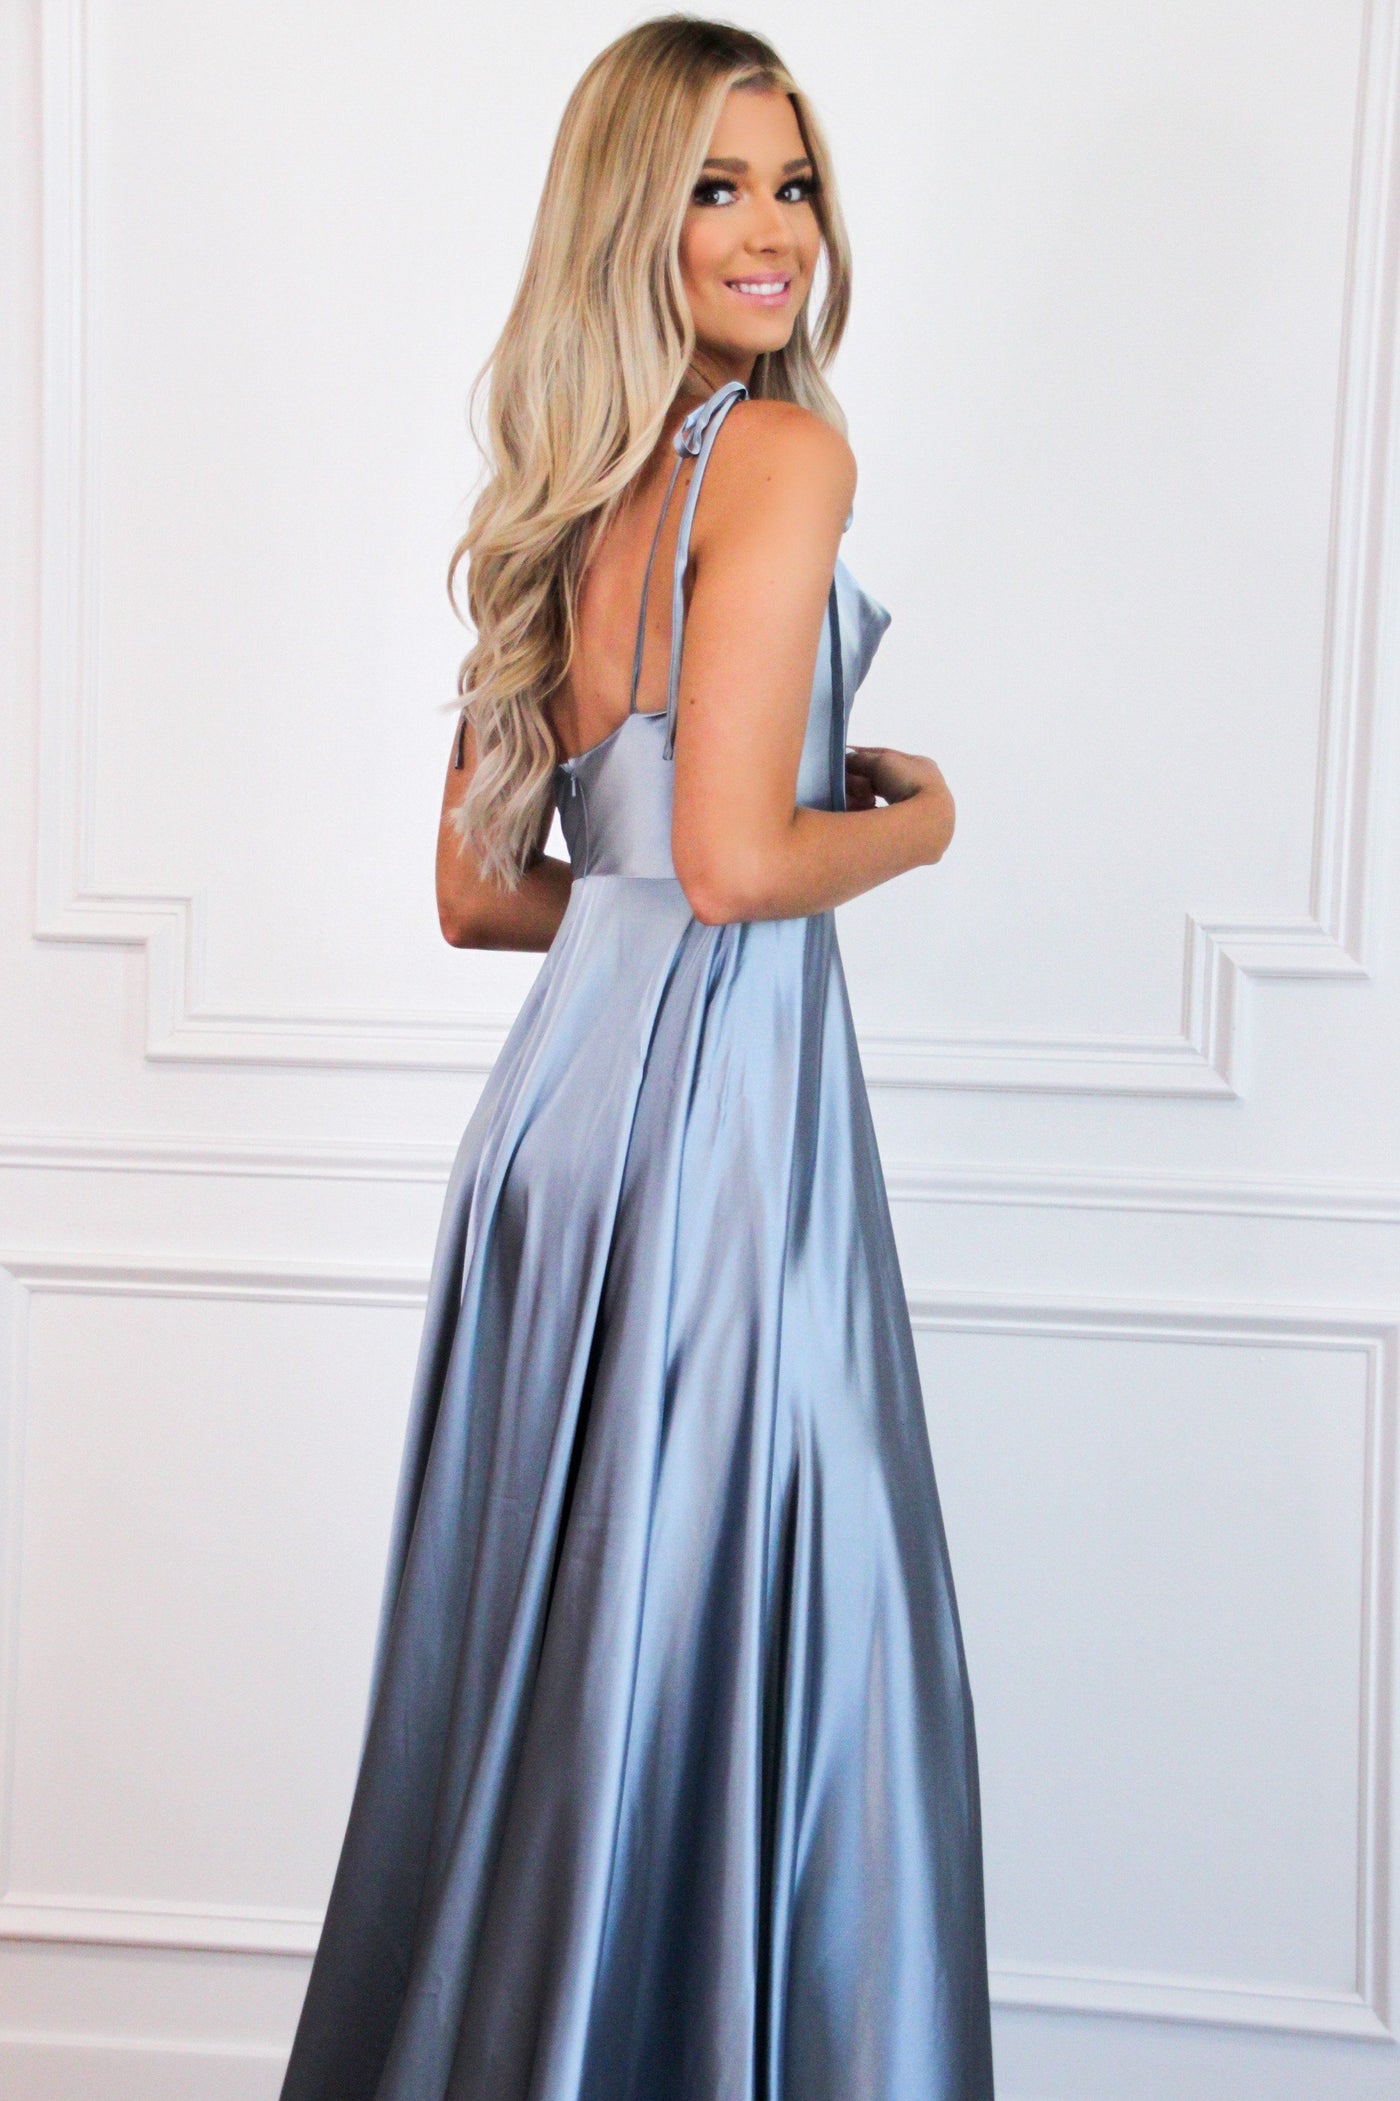 Tonight's the Night Satin Formal Dress: Dusty Blue - Bella and Bloom Boutique